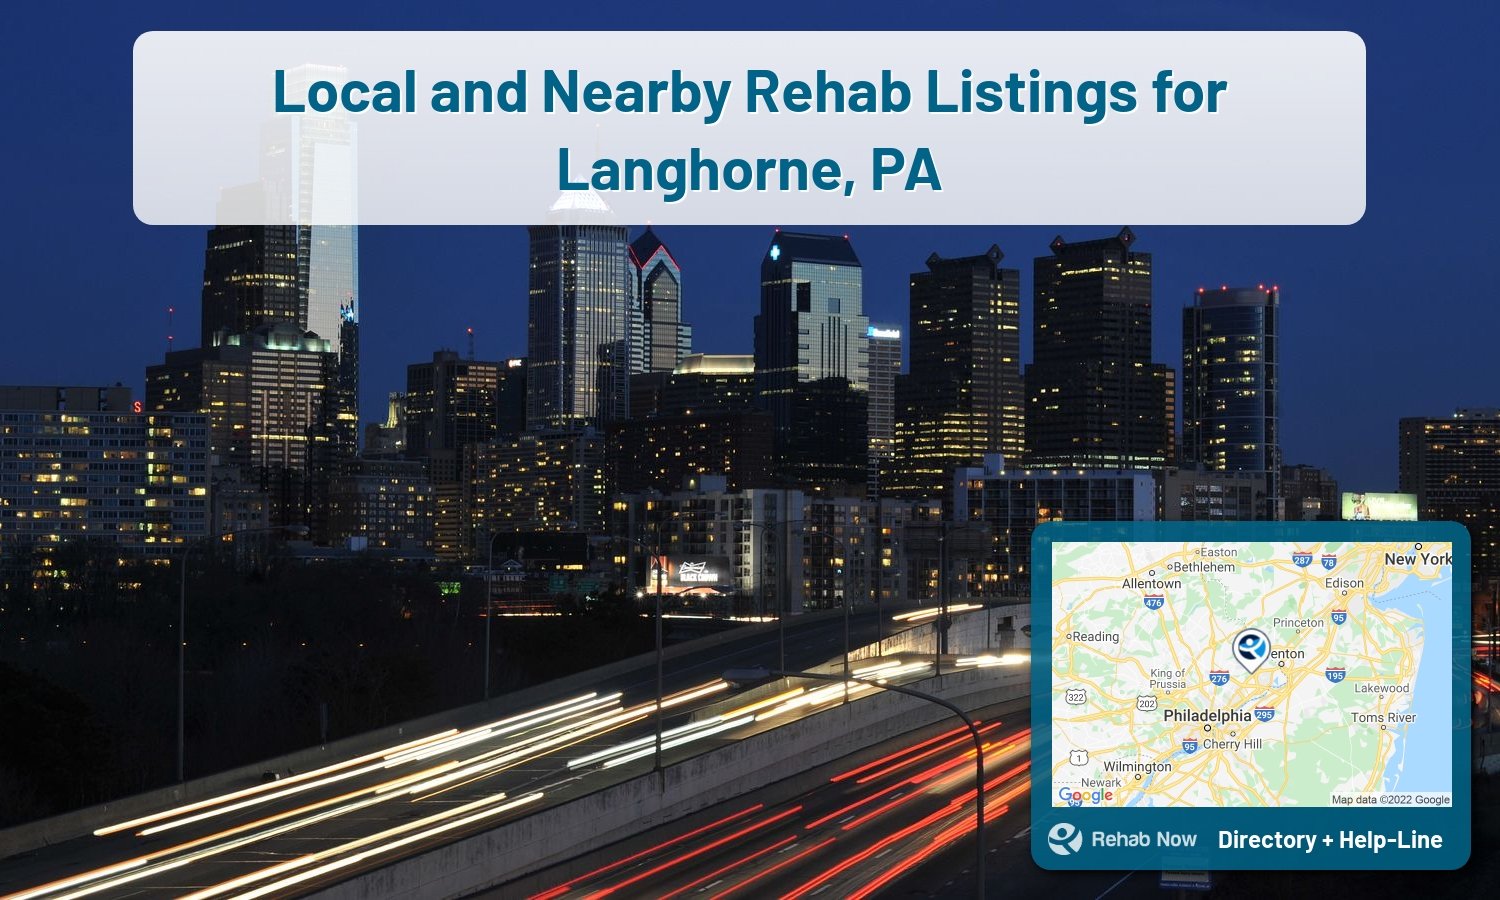 Drug rehab and alcohol treatment services nearby Langhorne, PA. Need help choosing a treatment program? Call our free hotline!